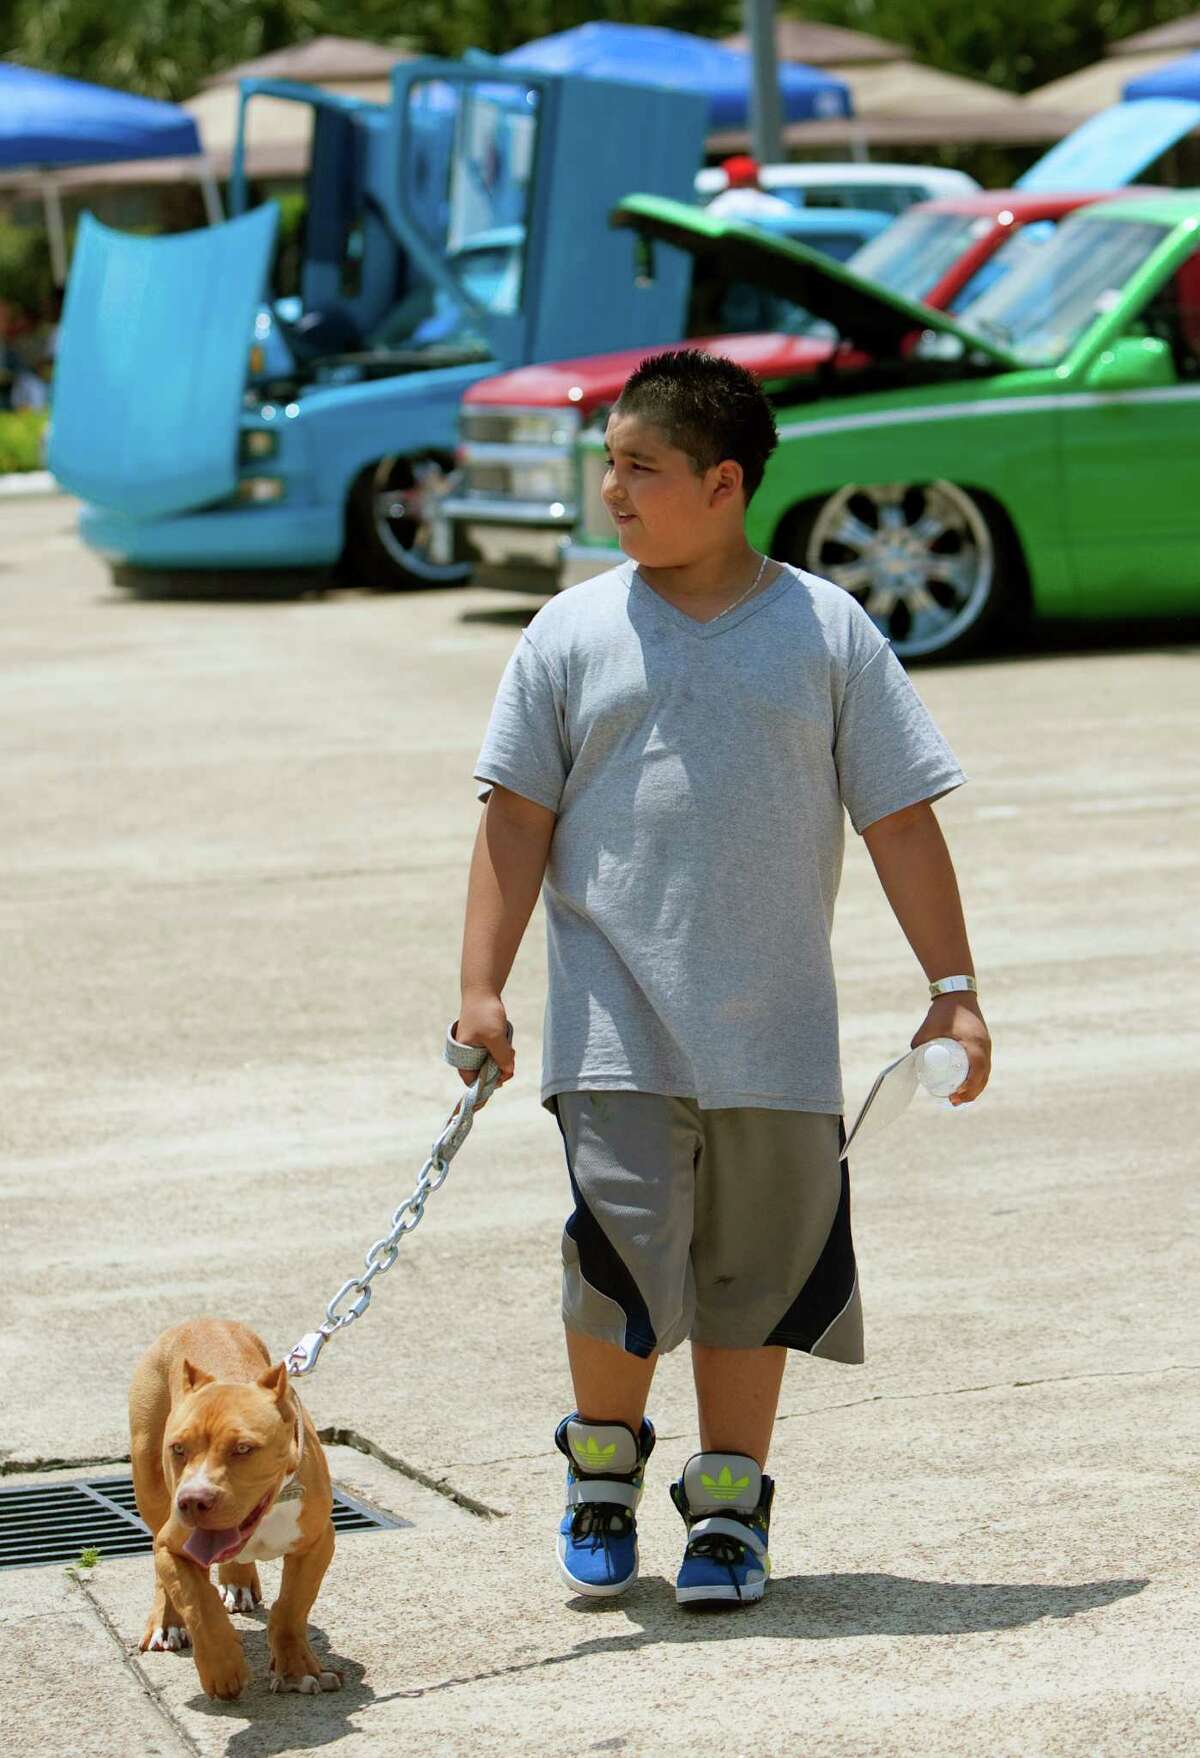 Alexis Cardenas, 11, walks with his dog Lionking, during Houston's 2nd Annual American Bully Dog & Custom Car Expo Saturday, April 28, 2012, in Houston.